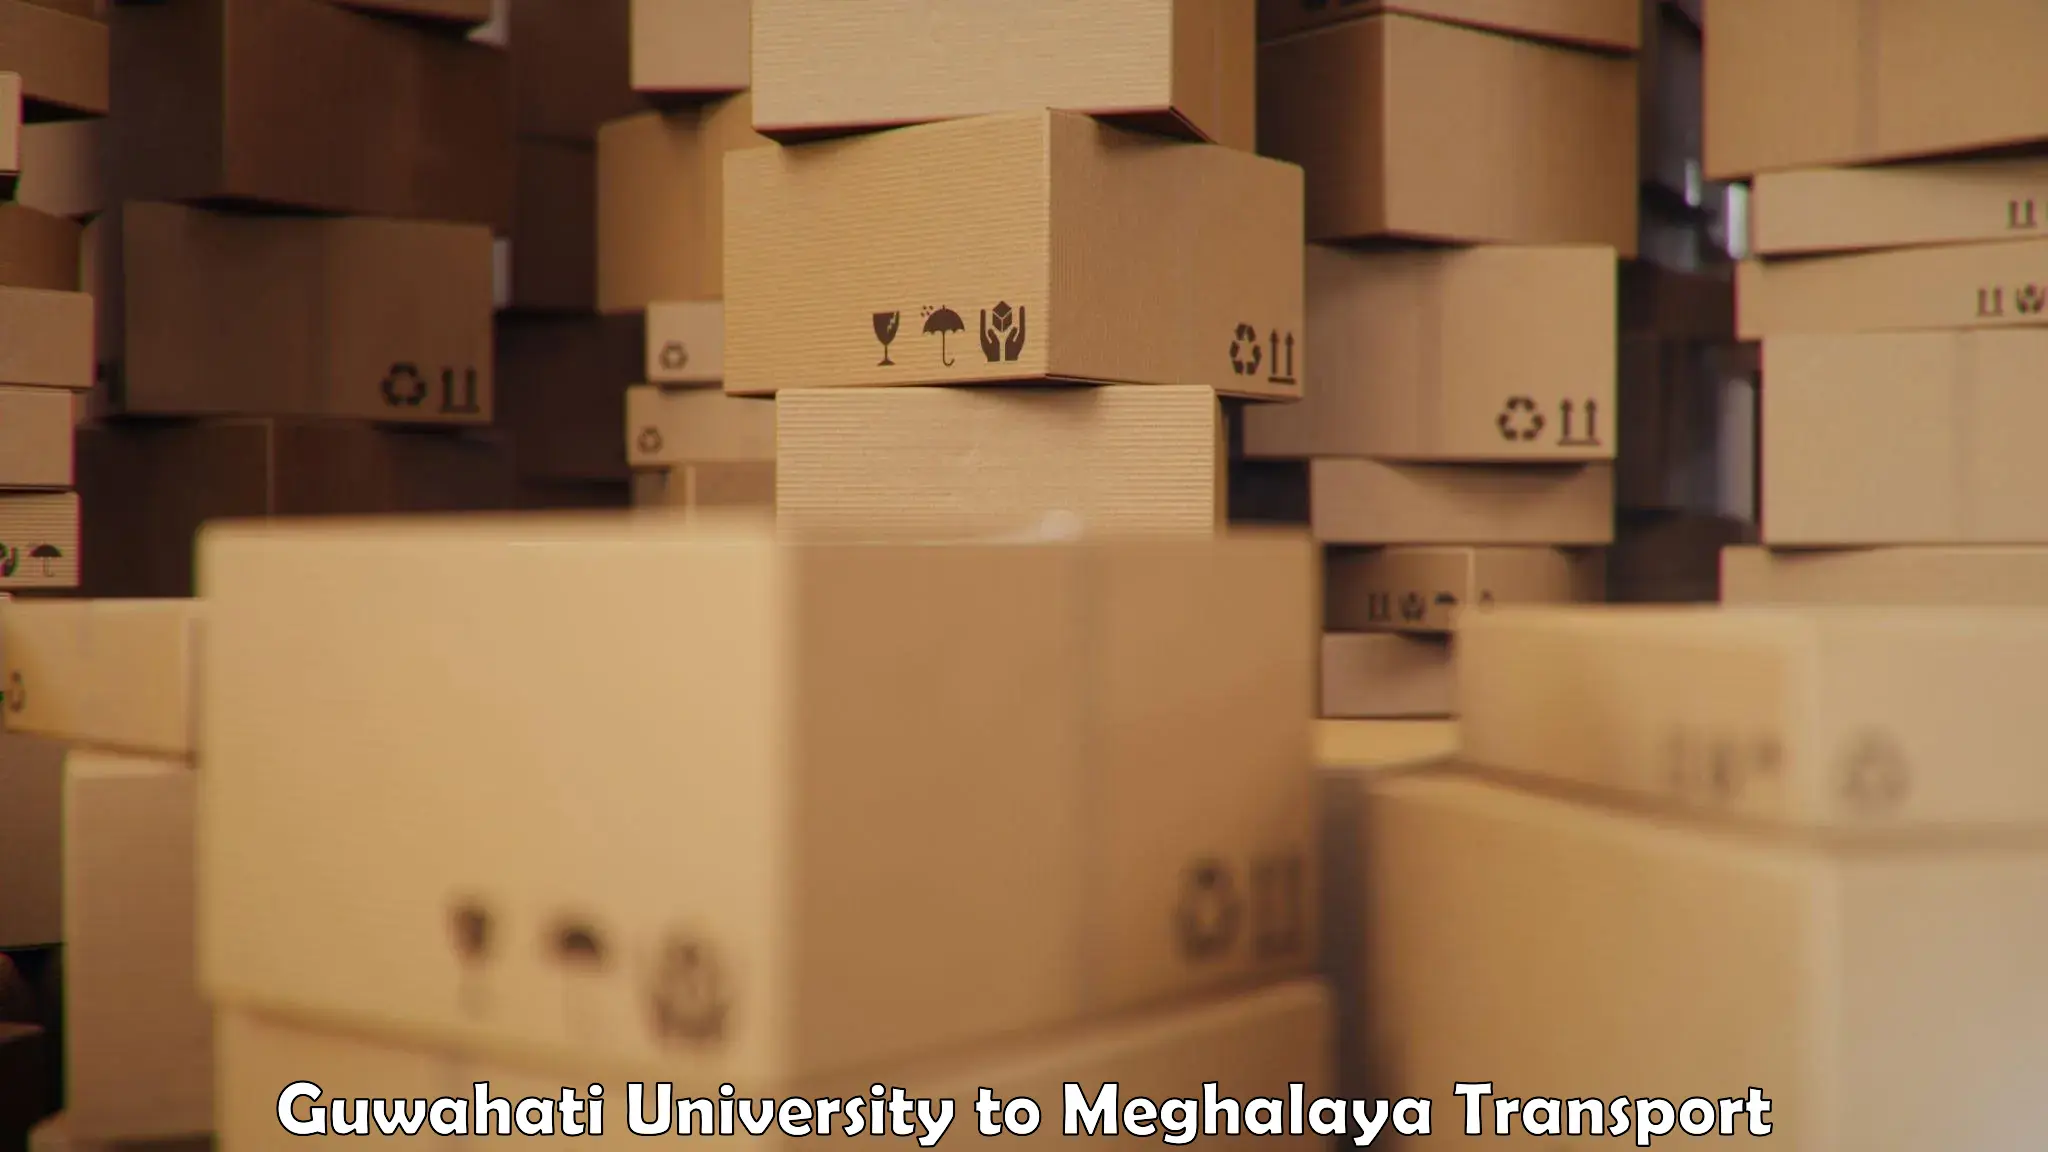 Road transport online services in Guwahati University to Jowai